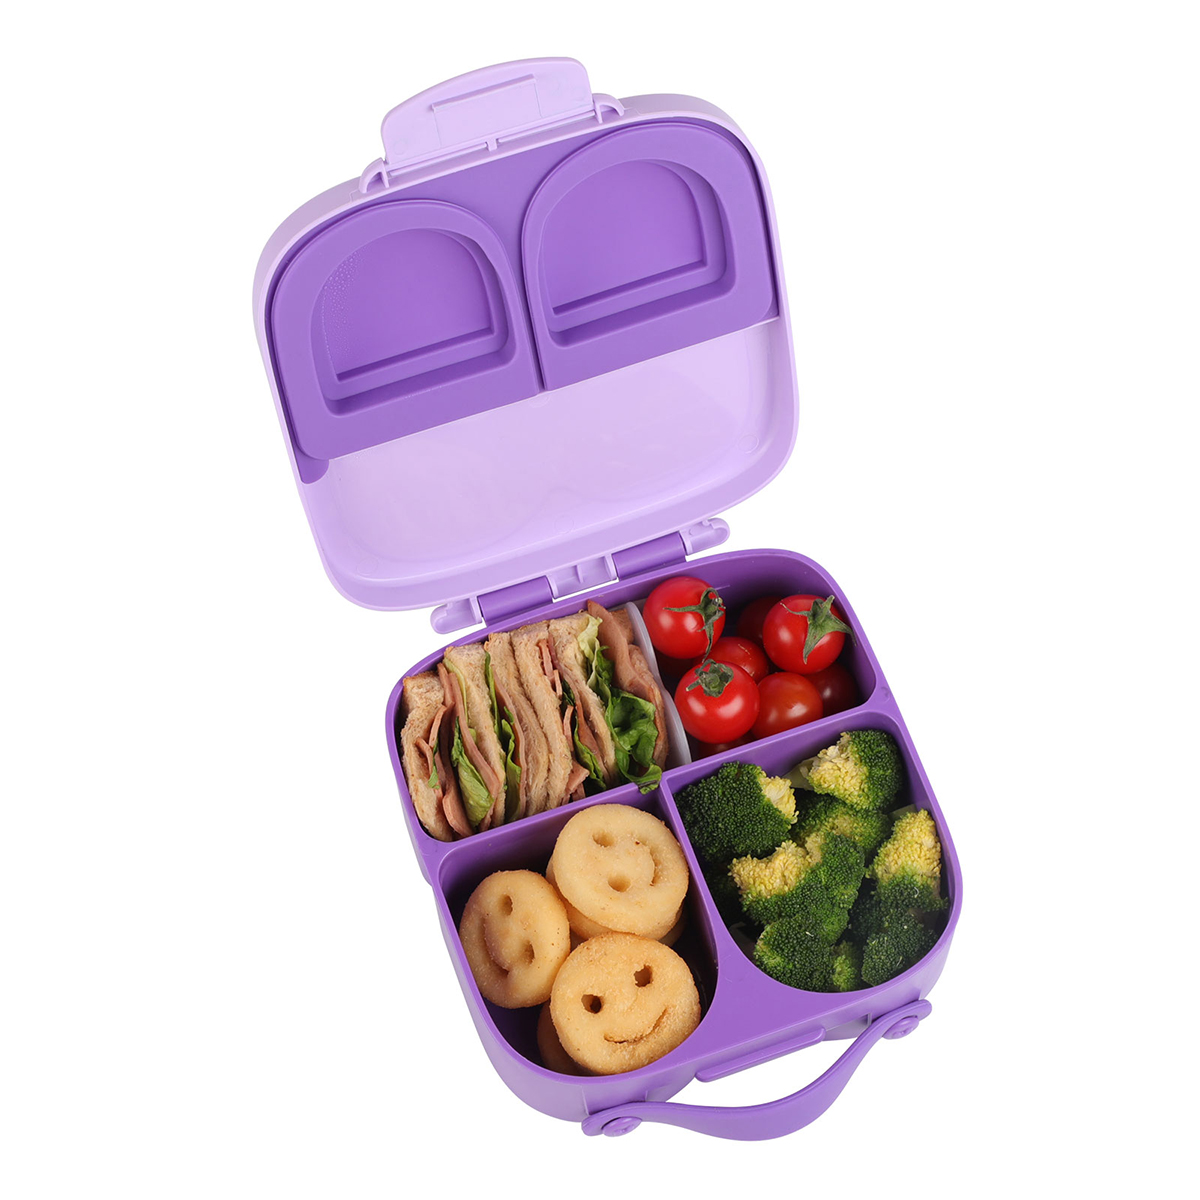 Cute Bunny Design Bento Box For Kids Children With 4 Compartment, Portable Plastic Lunch Box BPA Free